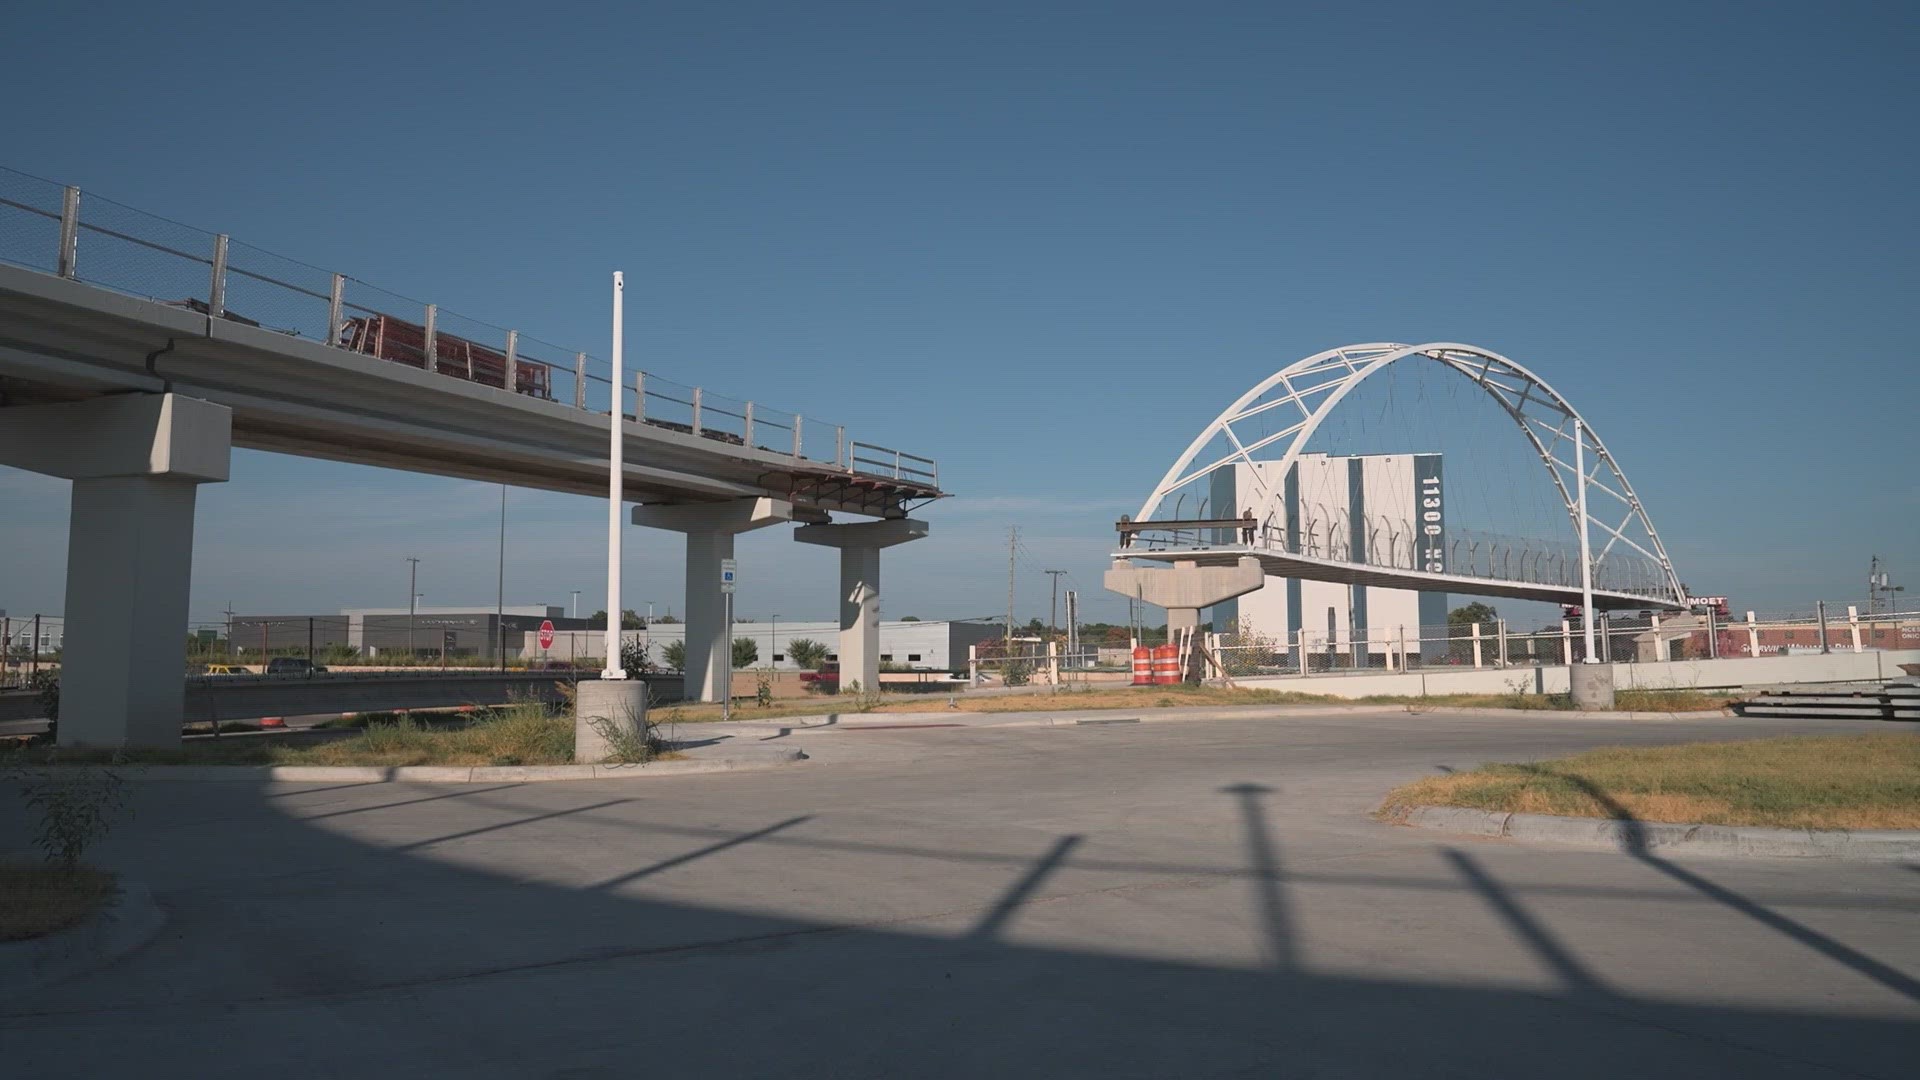 The 201-foot, 800,000-pound arch will connect Dallas’ already existing bike and pedestrian trails, TXDOT said.